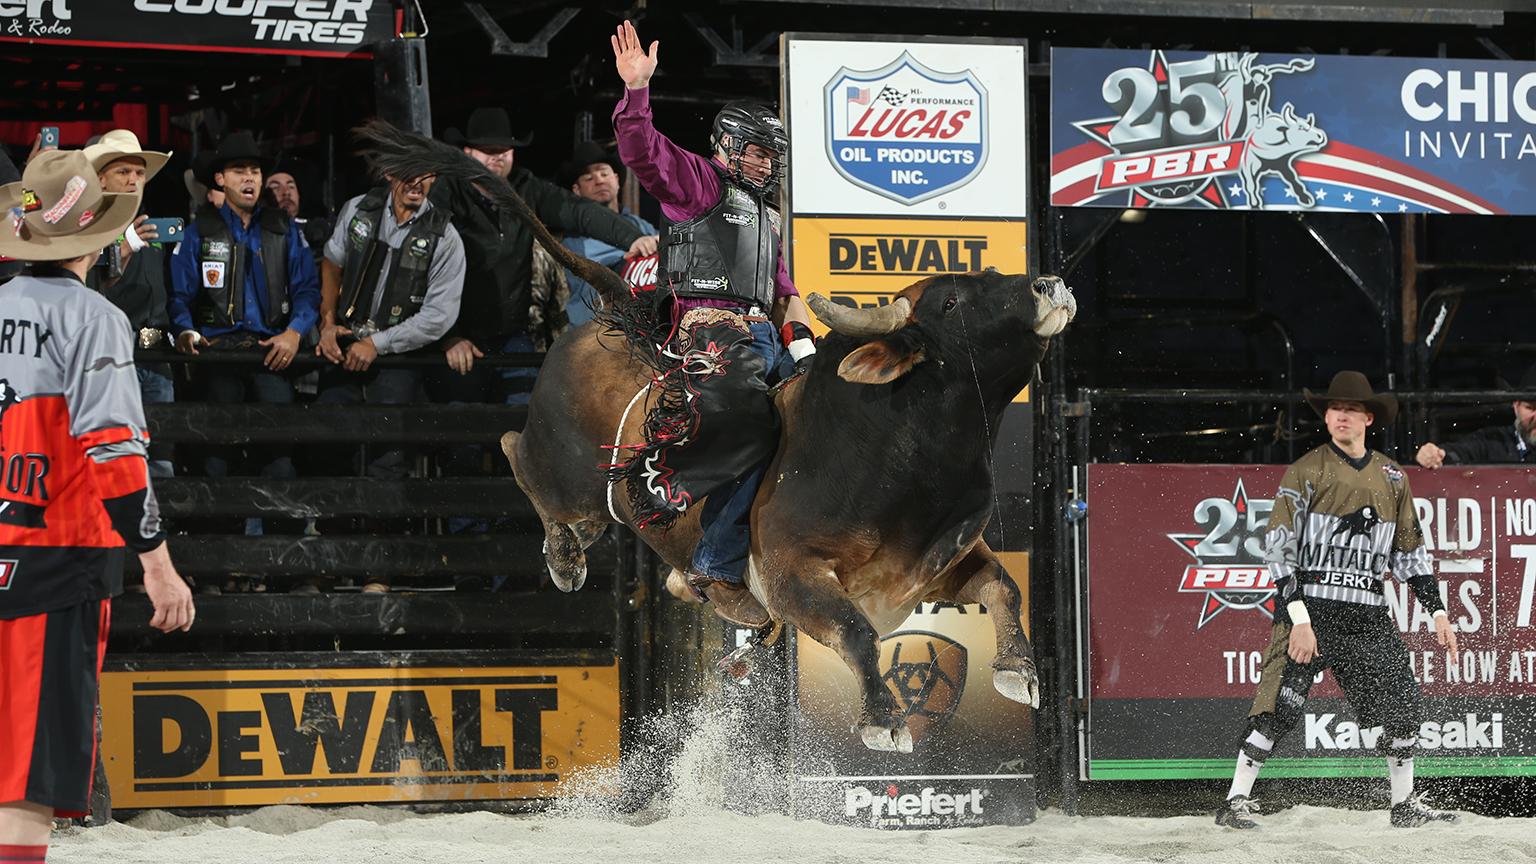 Ramon de Lima rides Blake Sharp/Sharp Farm & Cattle's Panama Outlaw during the second round of the Chicago Unleash the Beast PBR. (Photo by Andy Watson)